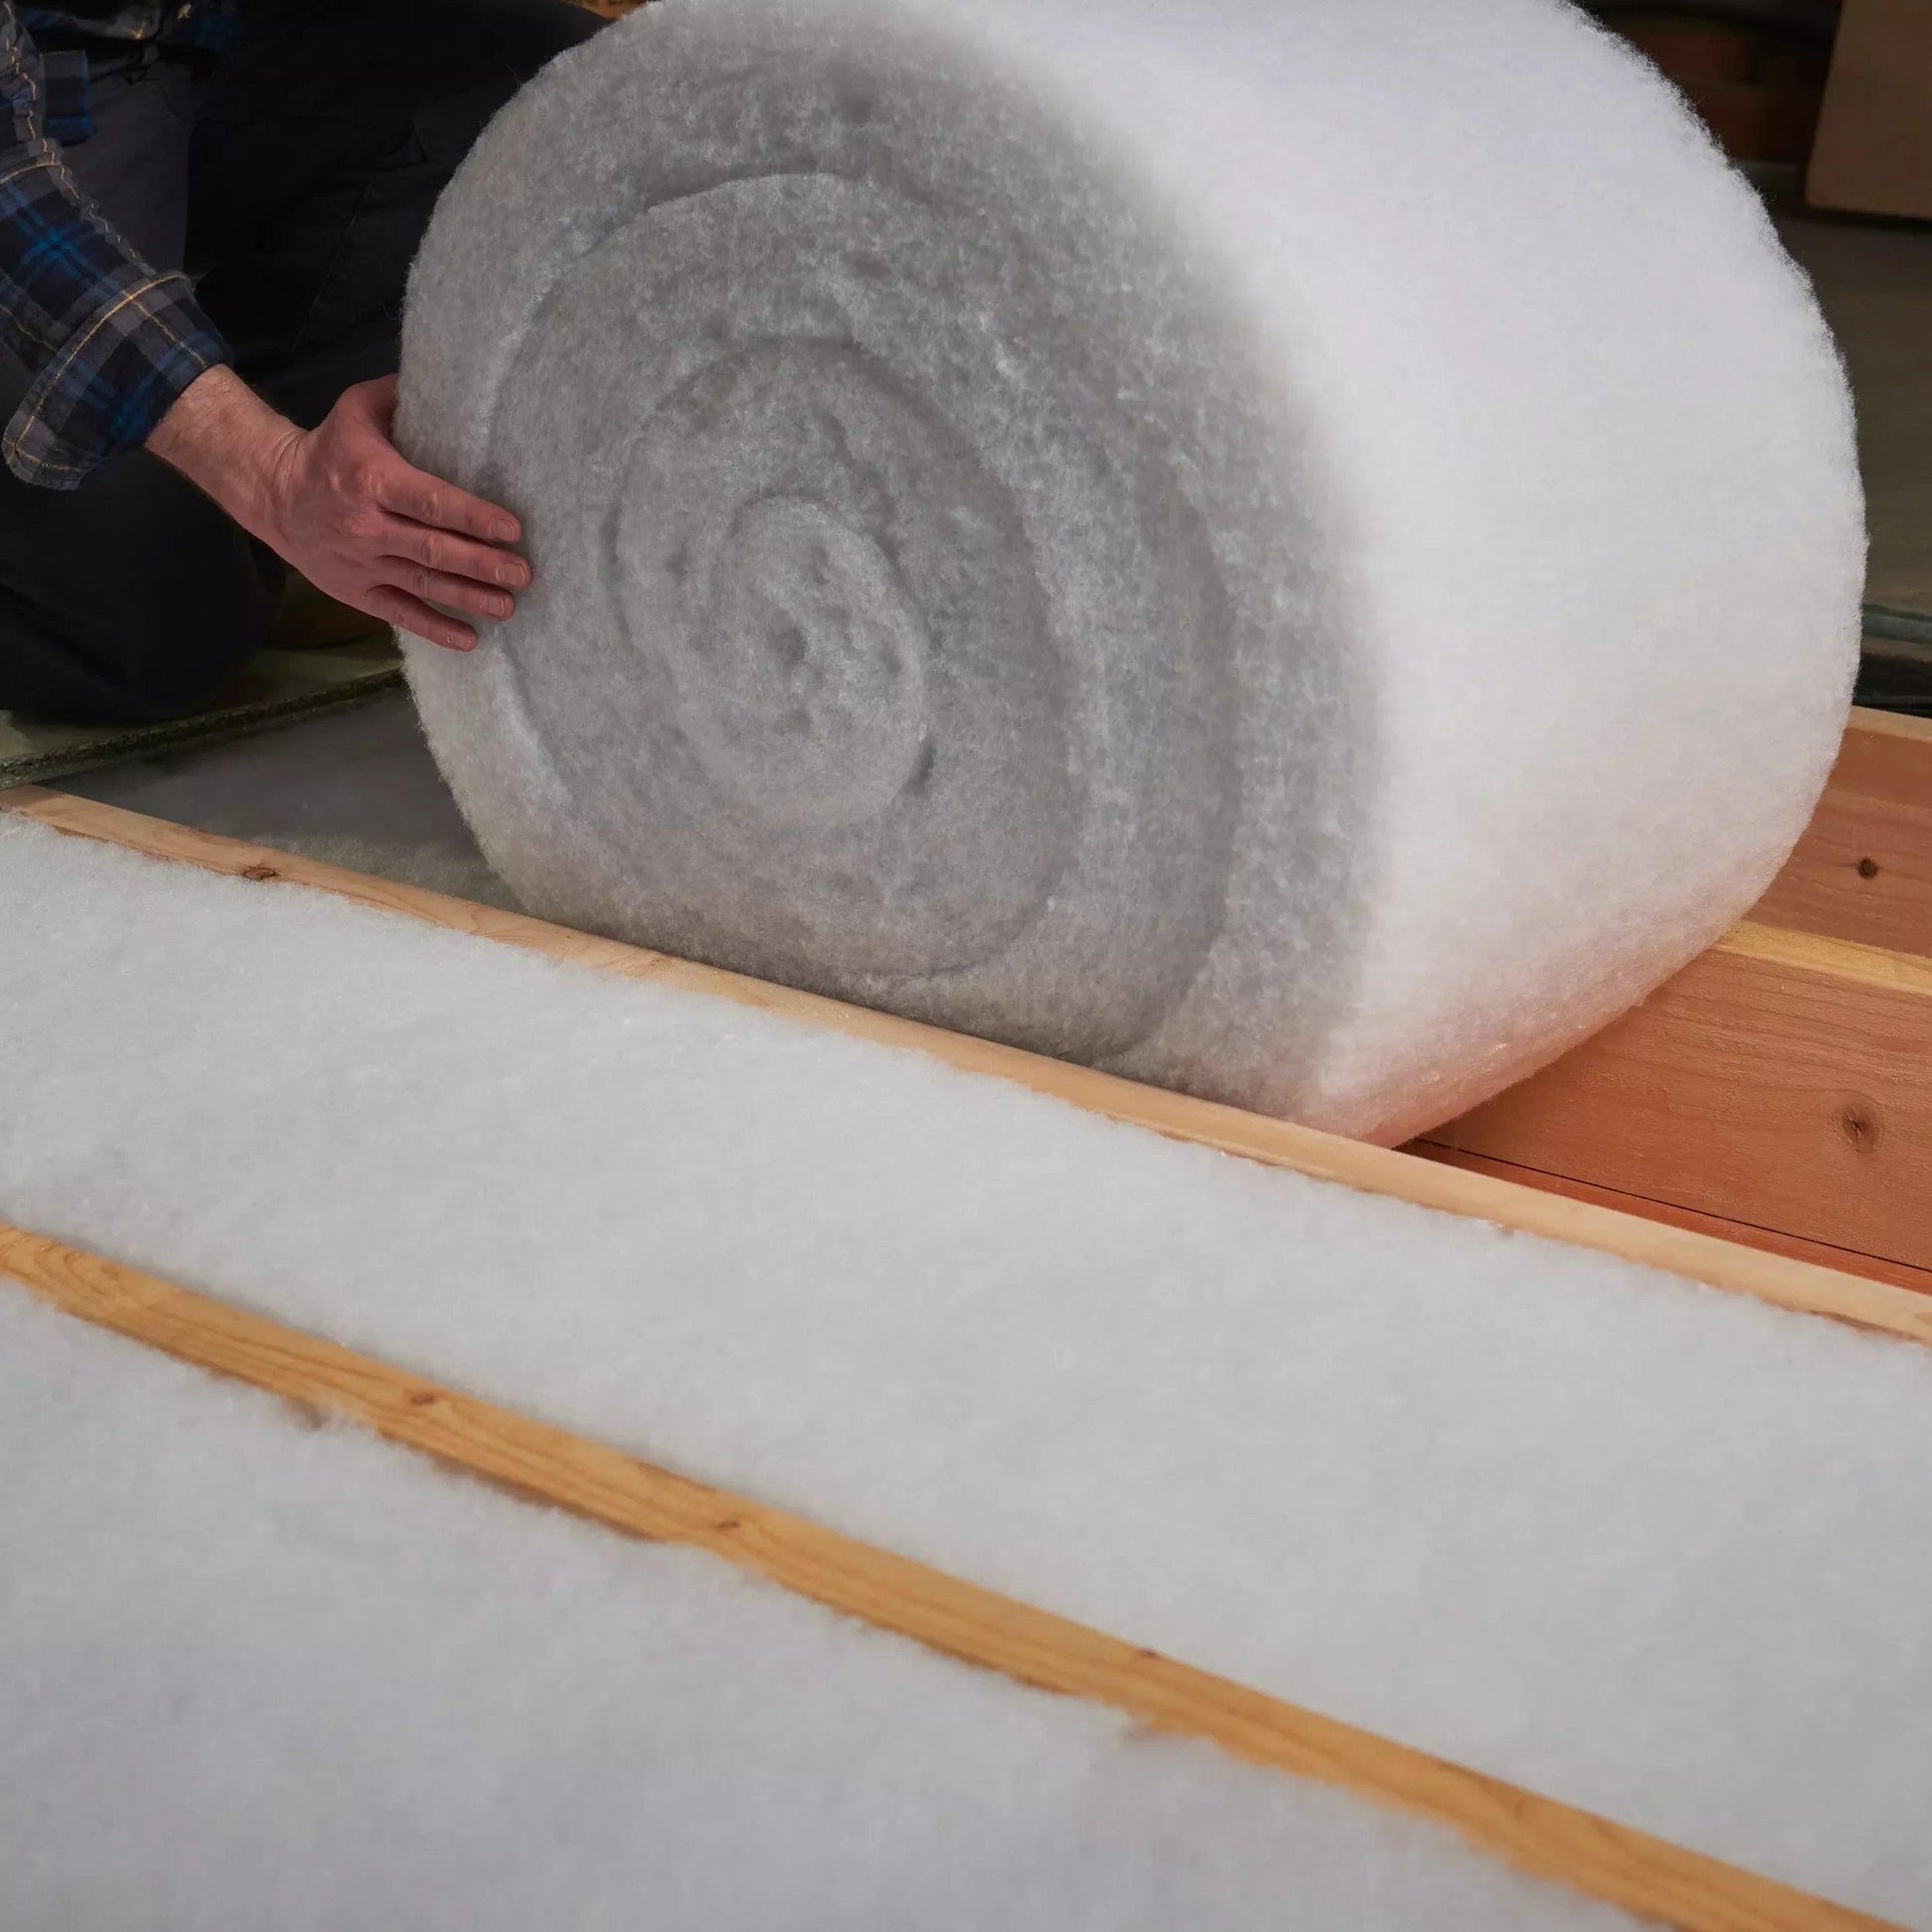 740mm Width - Eco Friendly Itch Free Thermal Insulation Roll - HighLoft